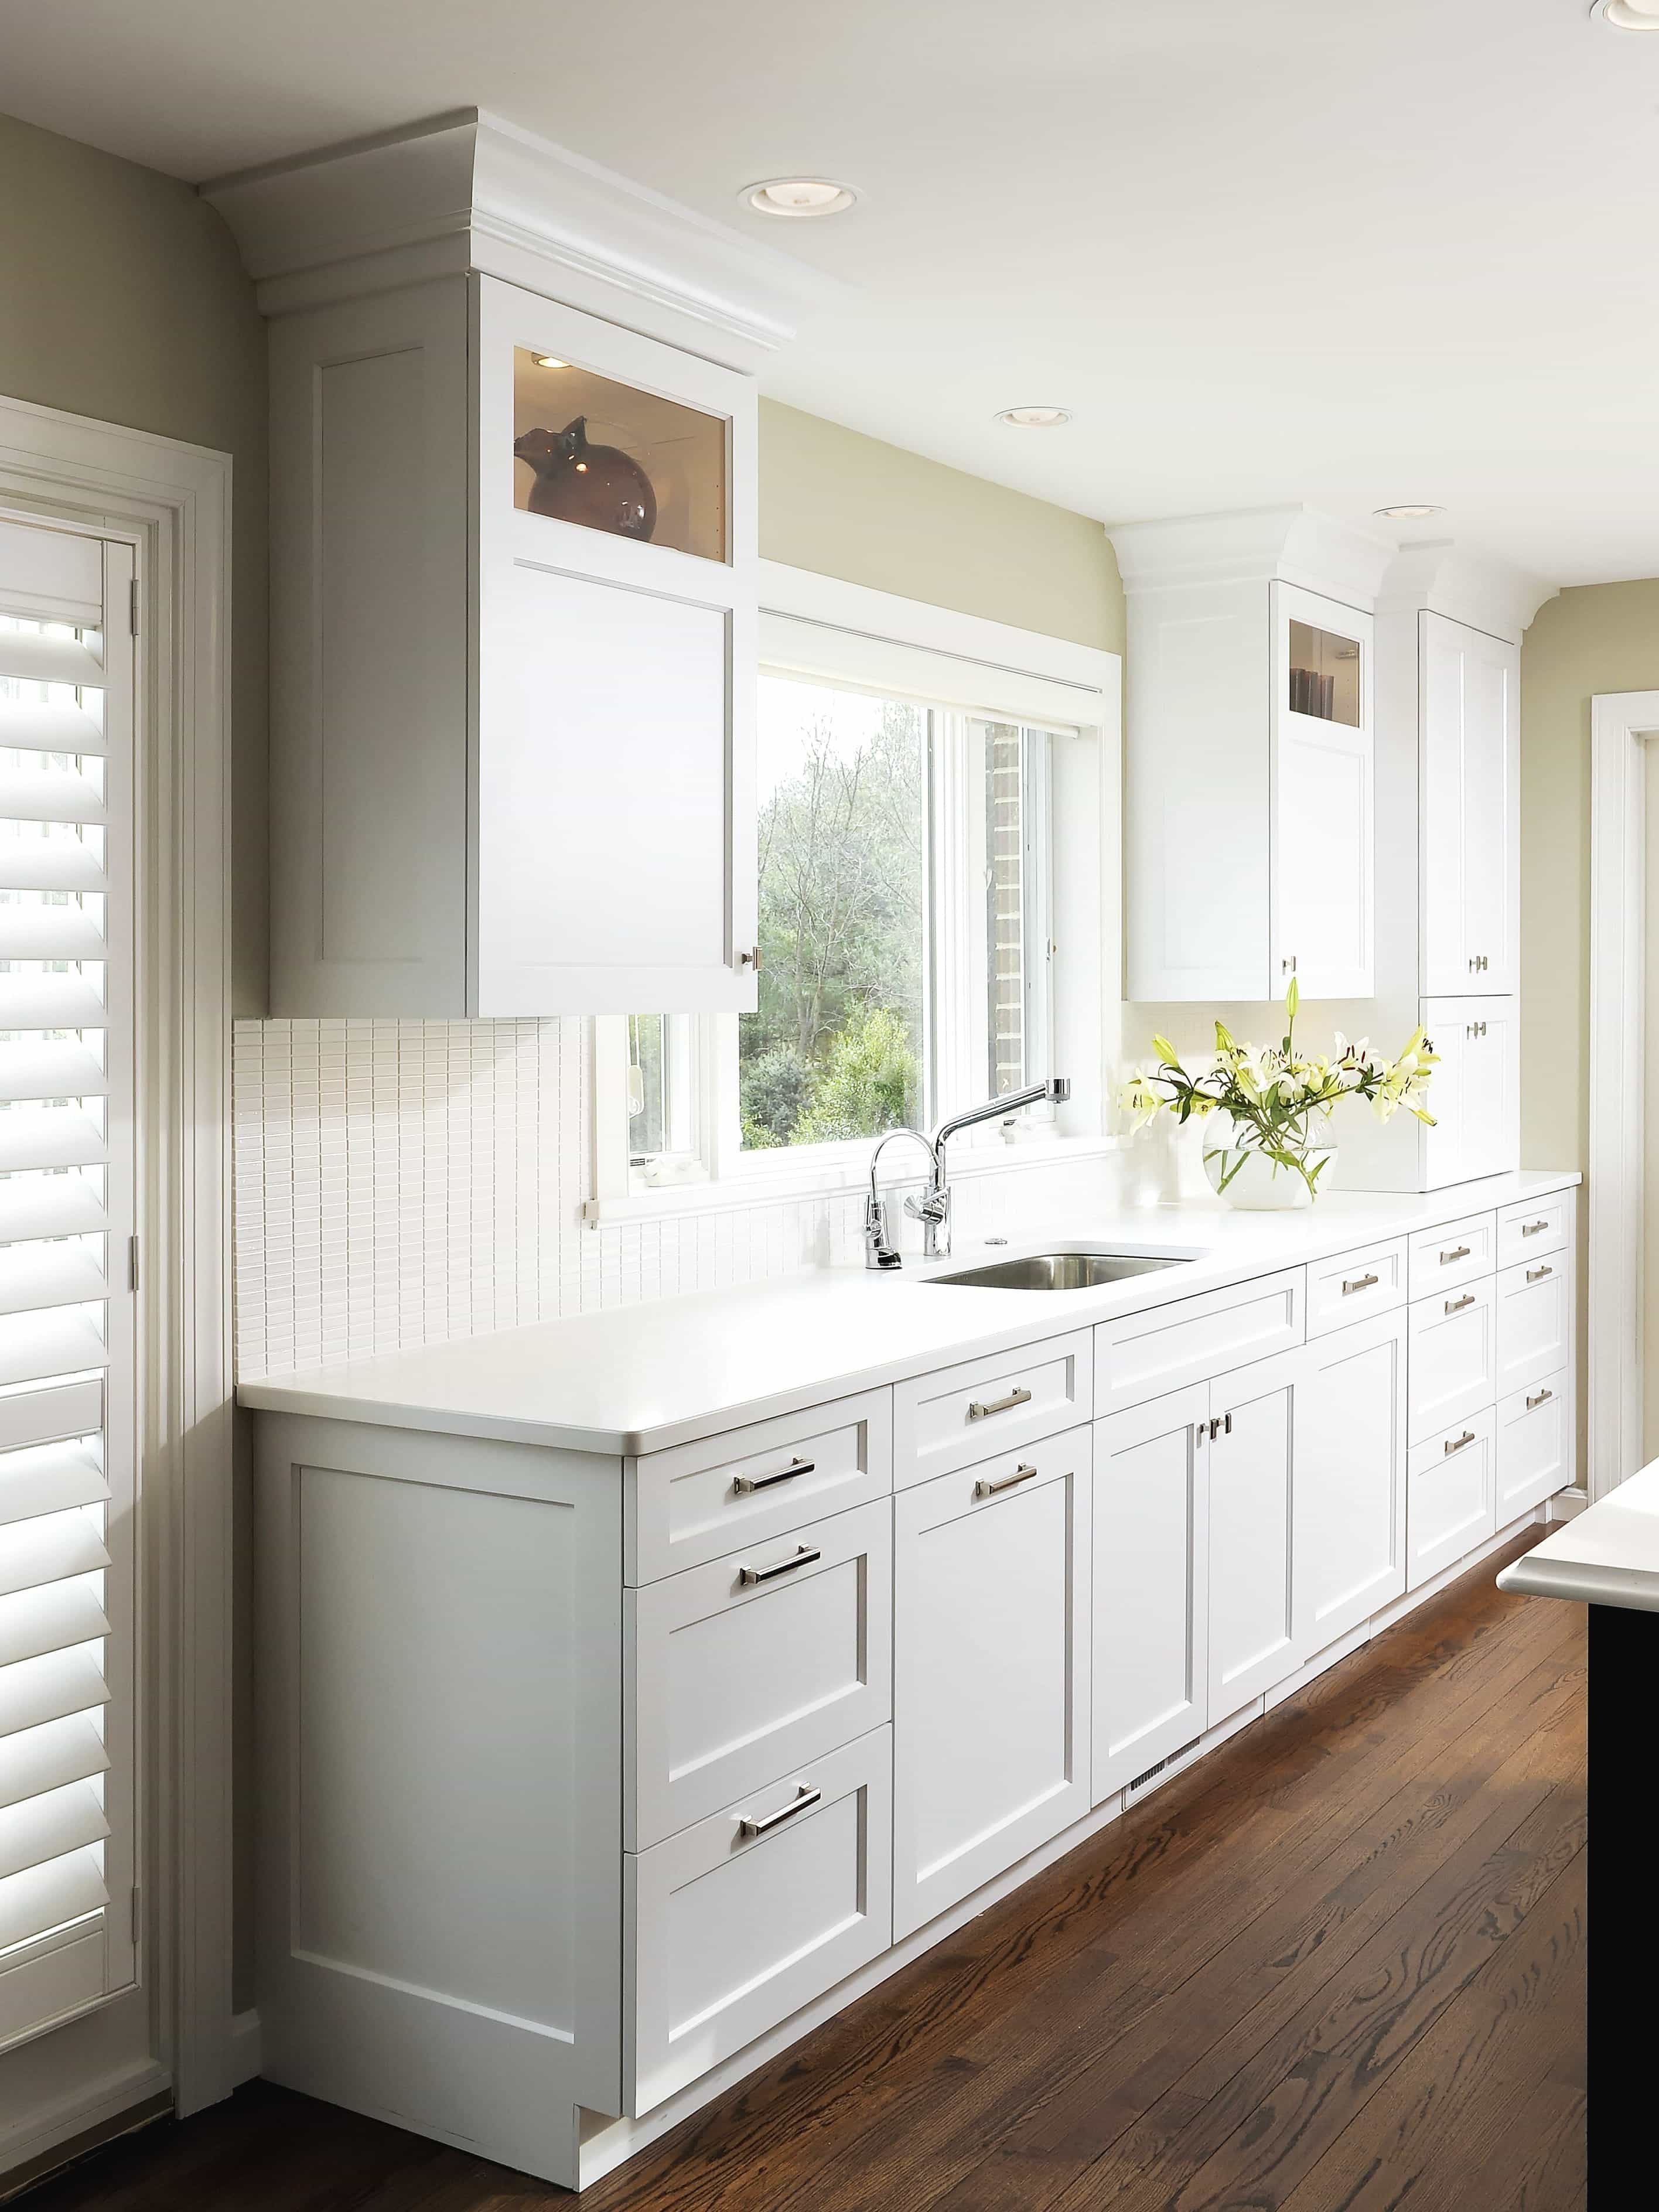 Tips On How To Improve The Outlook Of White Shaker Kitchen Cabinets